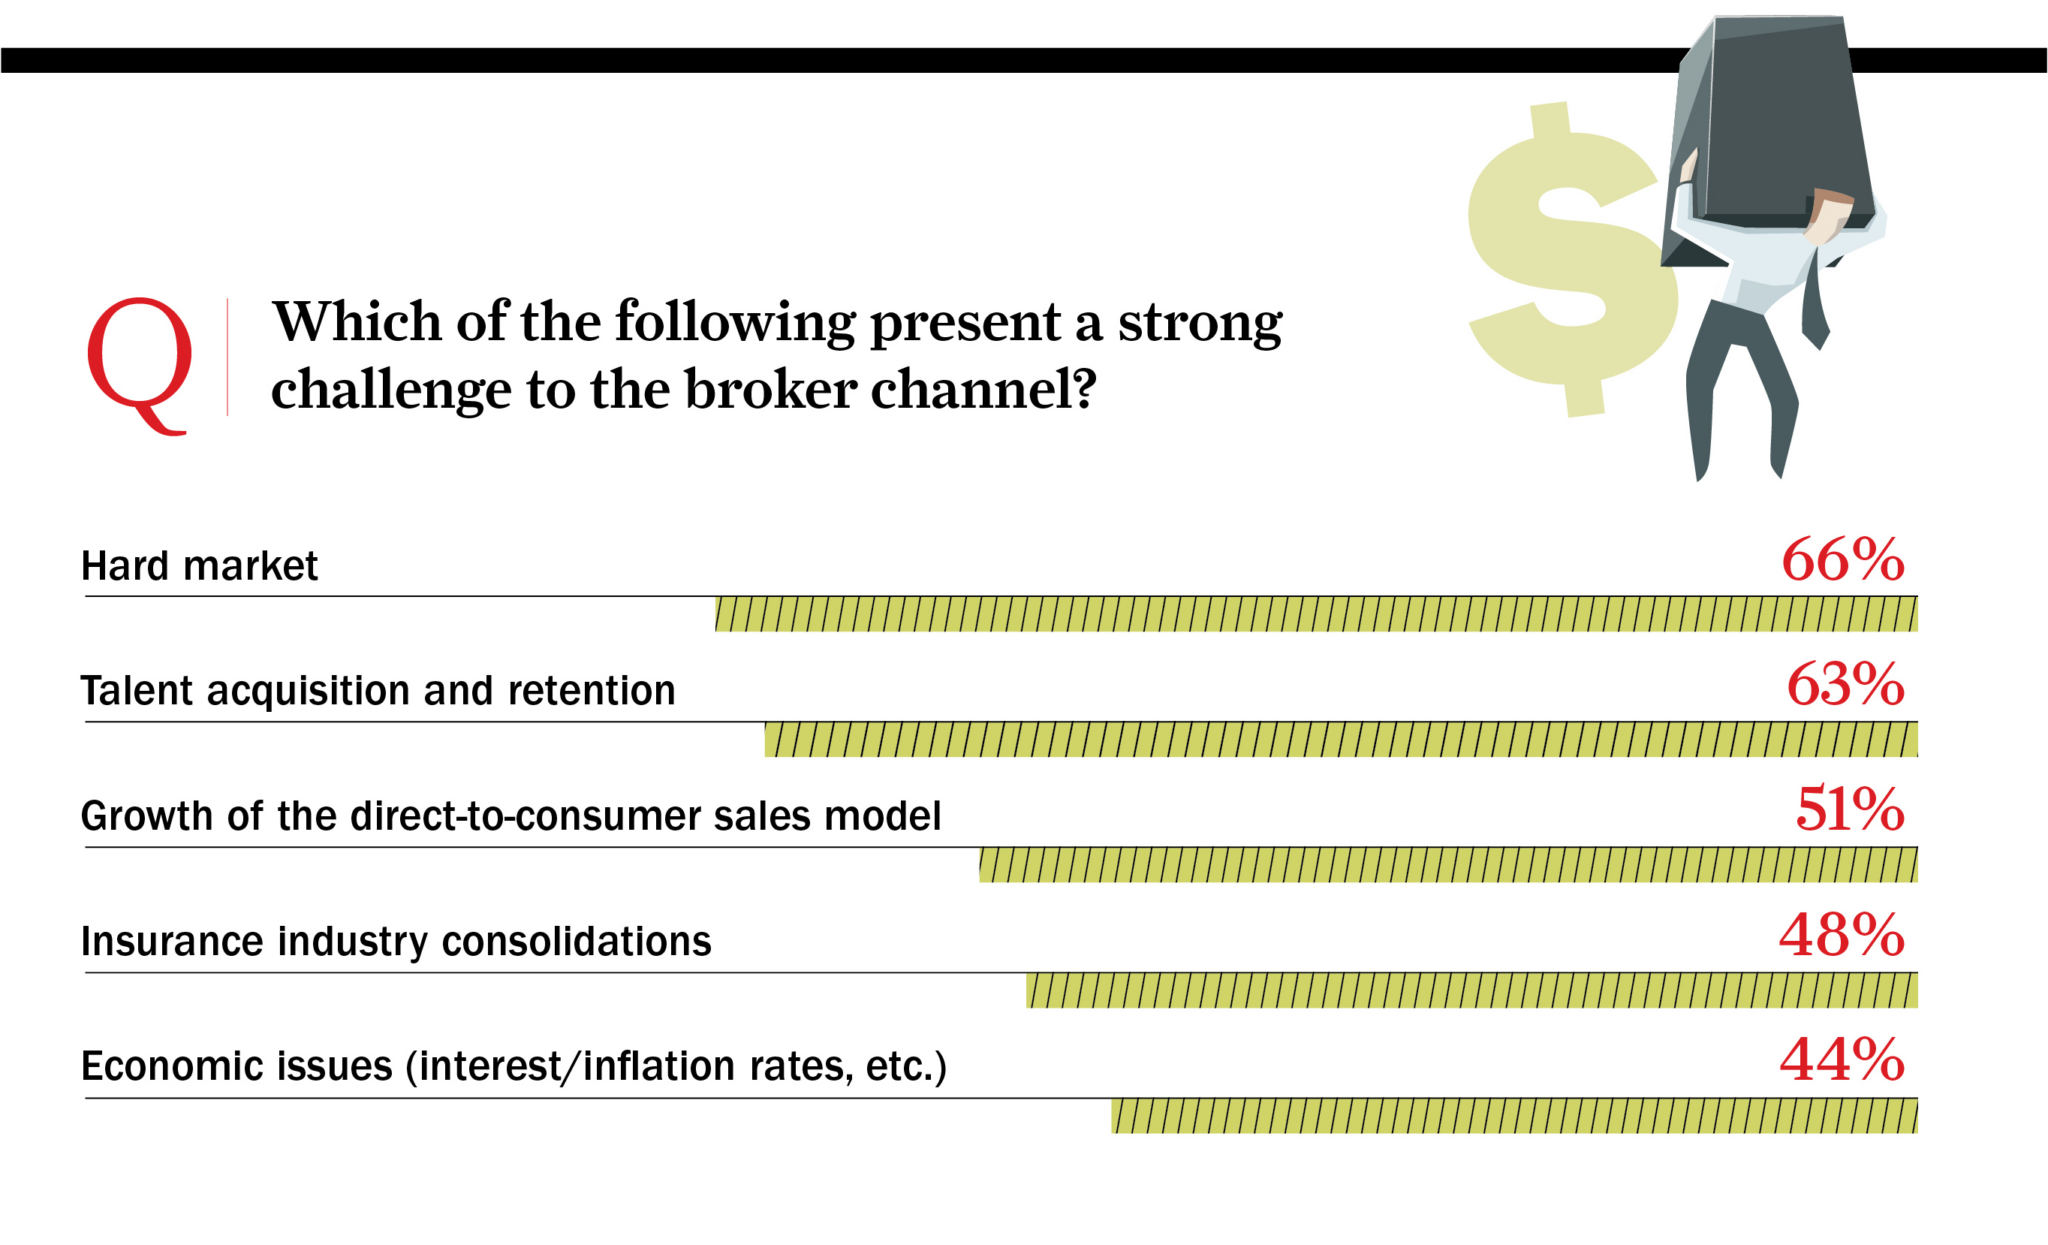 Question: Which of the following present a strong challenge to the broker channel? Answer: 66% Hard Market, 63% Talent acquisition and retention, 51% Growth of the direct-to-consumer sales model, 48% Insurance Industry consolidations, and 44% economic issues (interest/inflation rates, etc.).